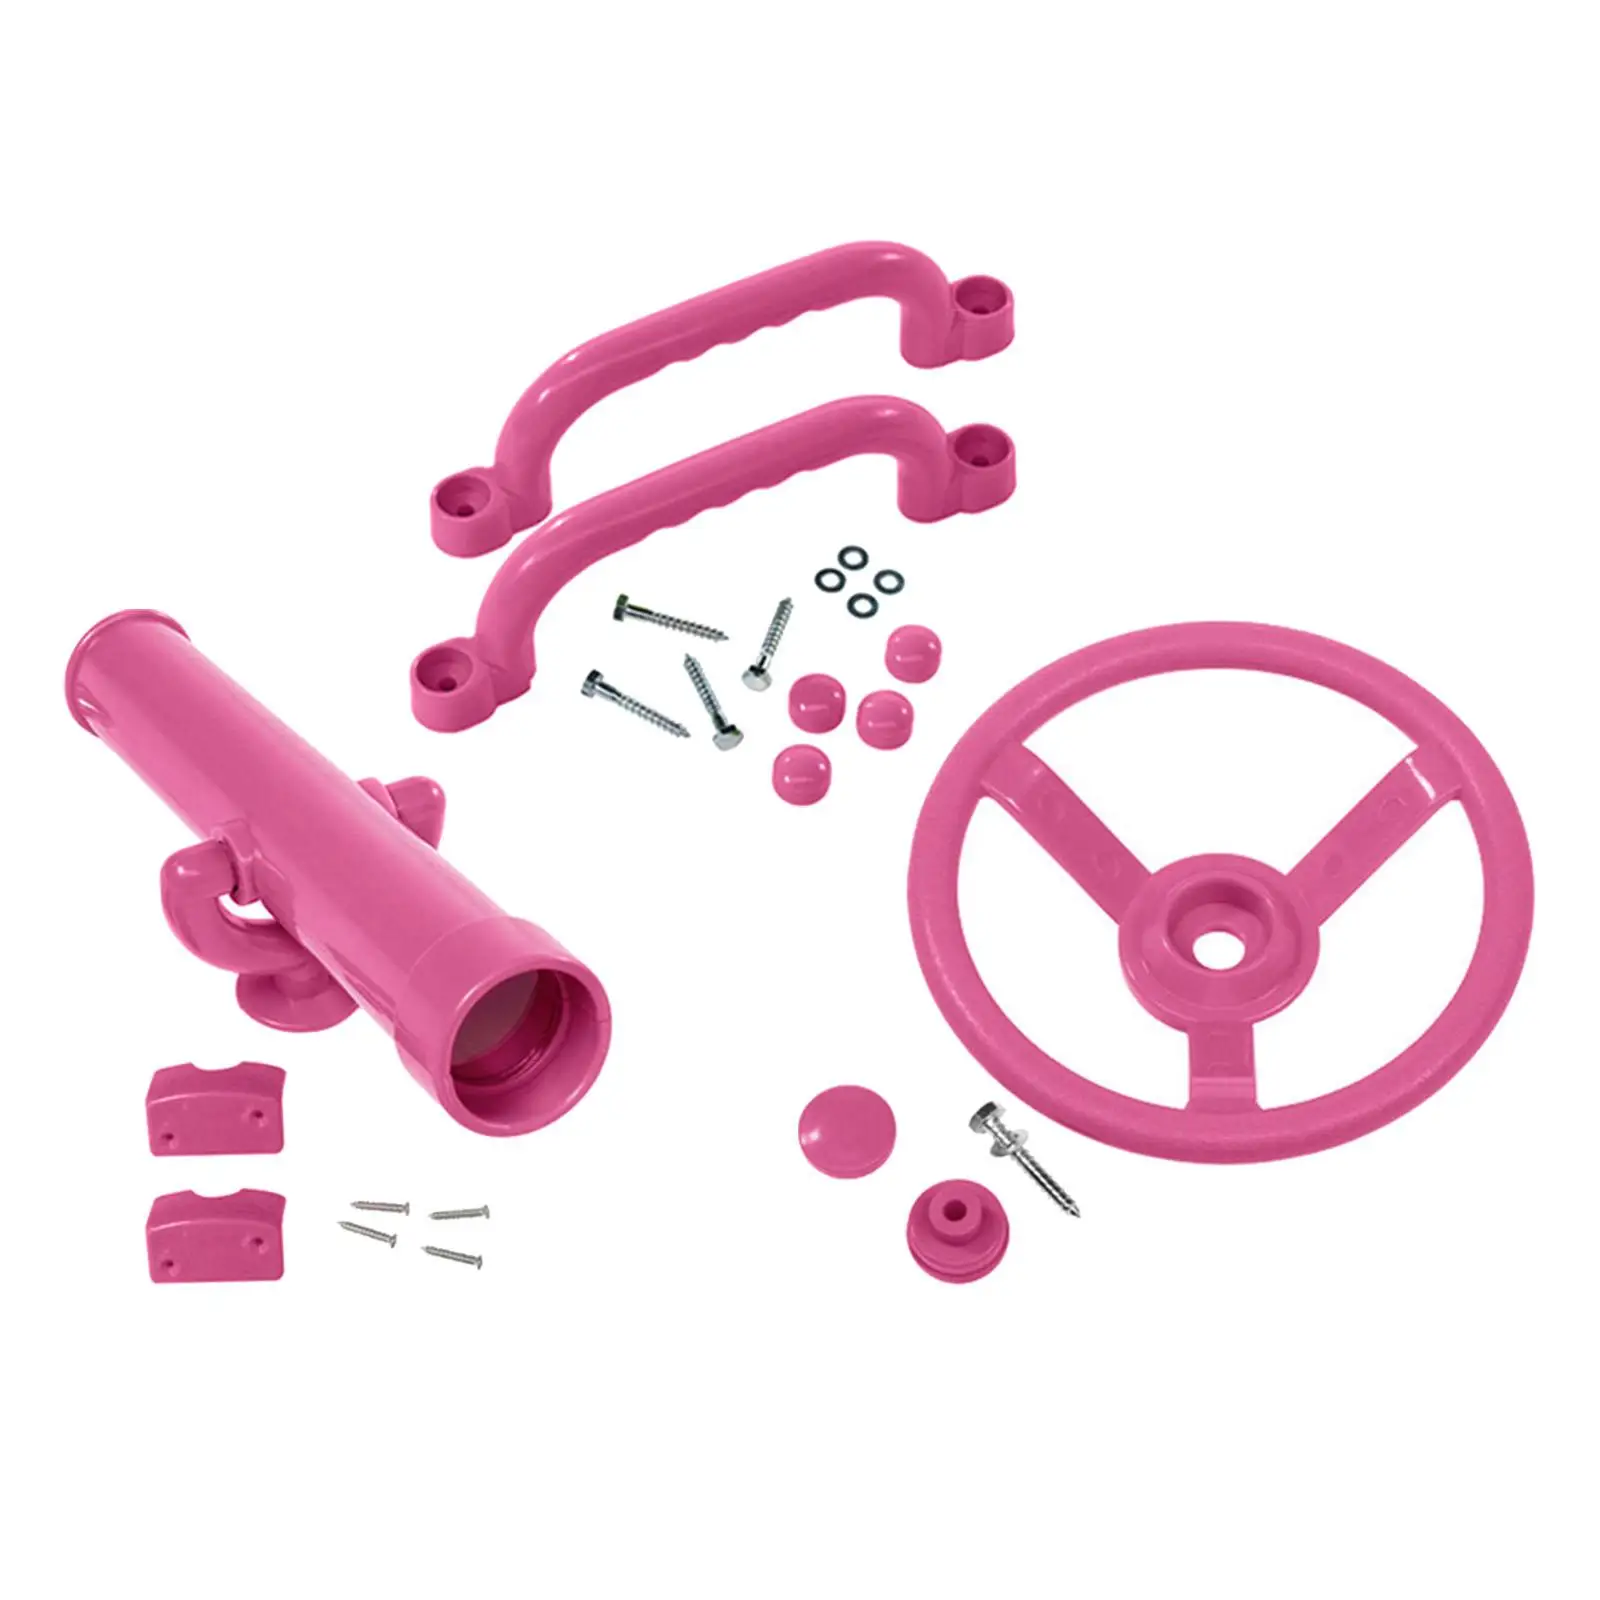 Playground Accessories Pink Set Pirate Telescope Steering Wheel Handle Bars for Tree House Backyard Swingset Jungle Gym Parts